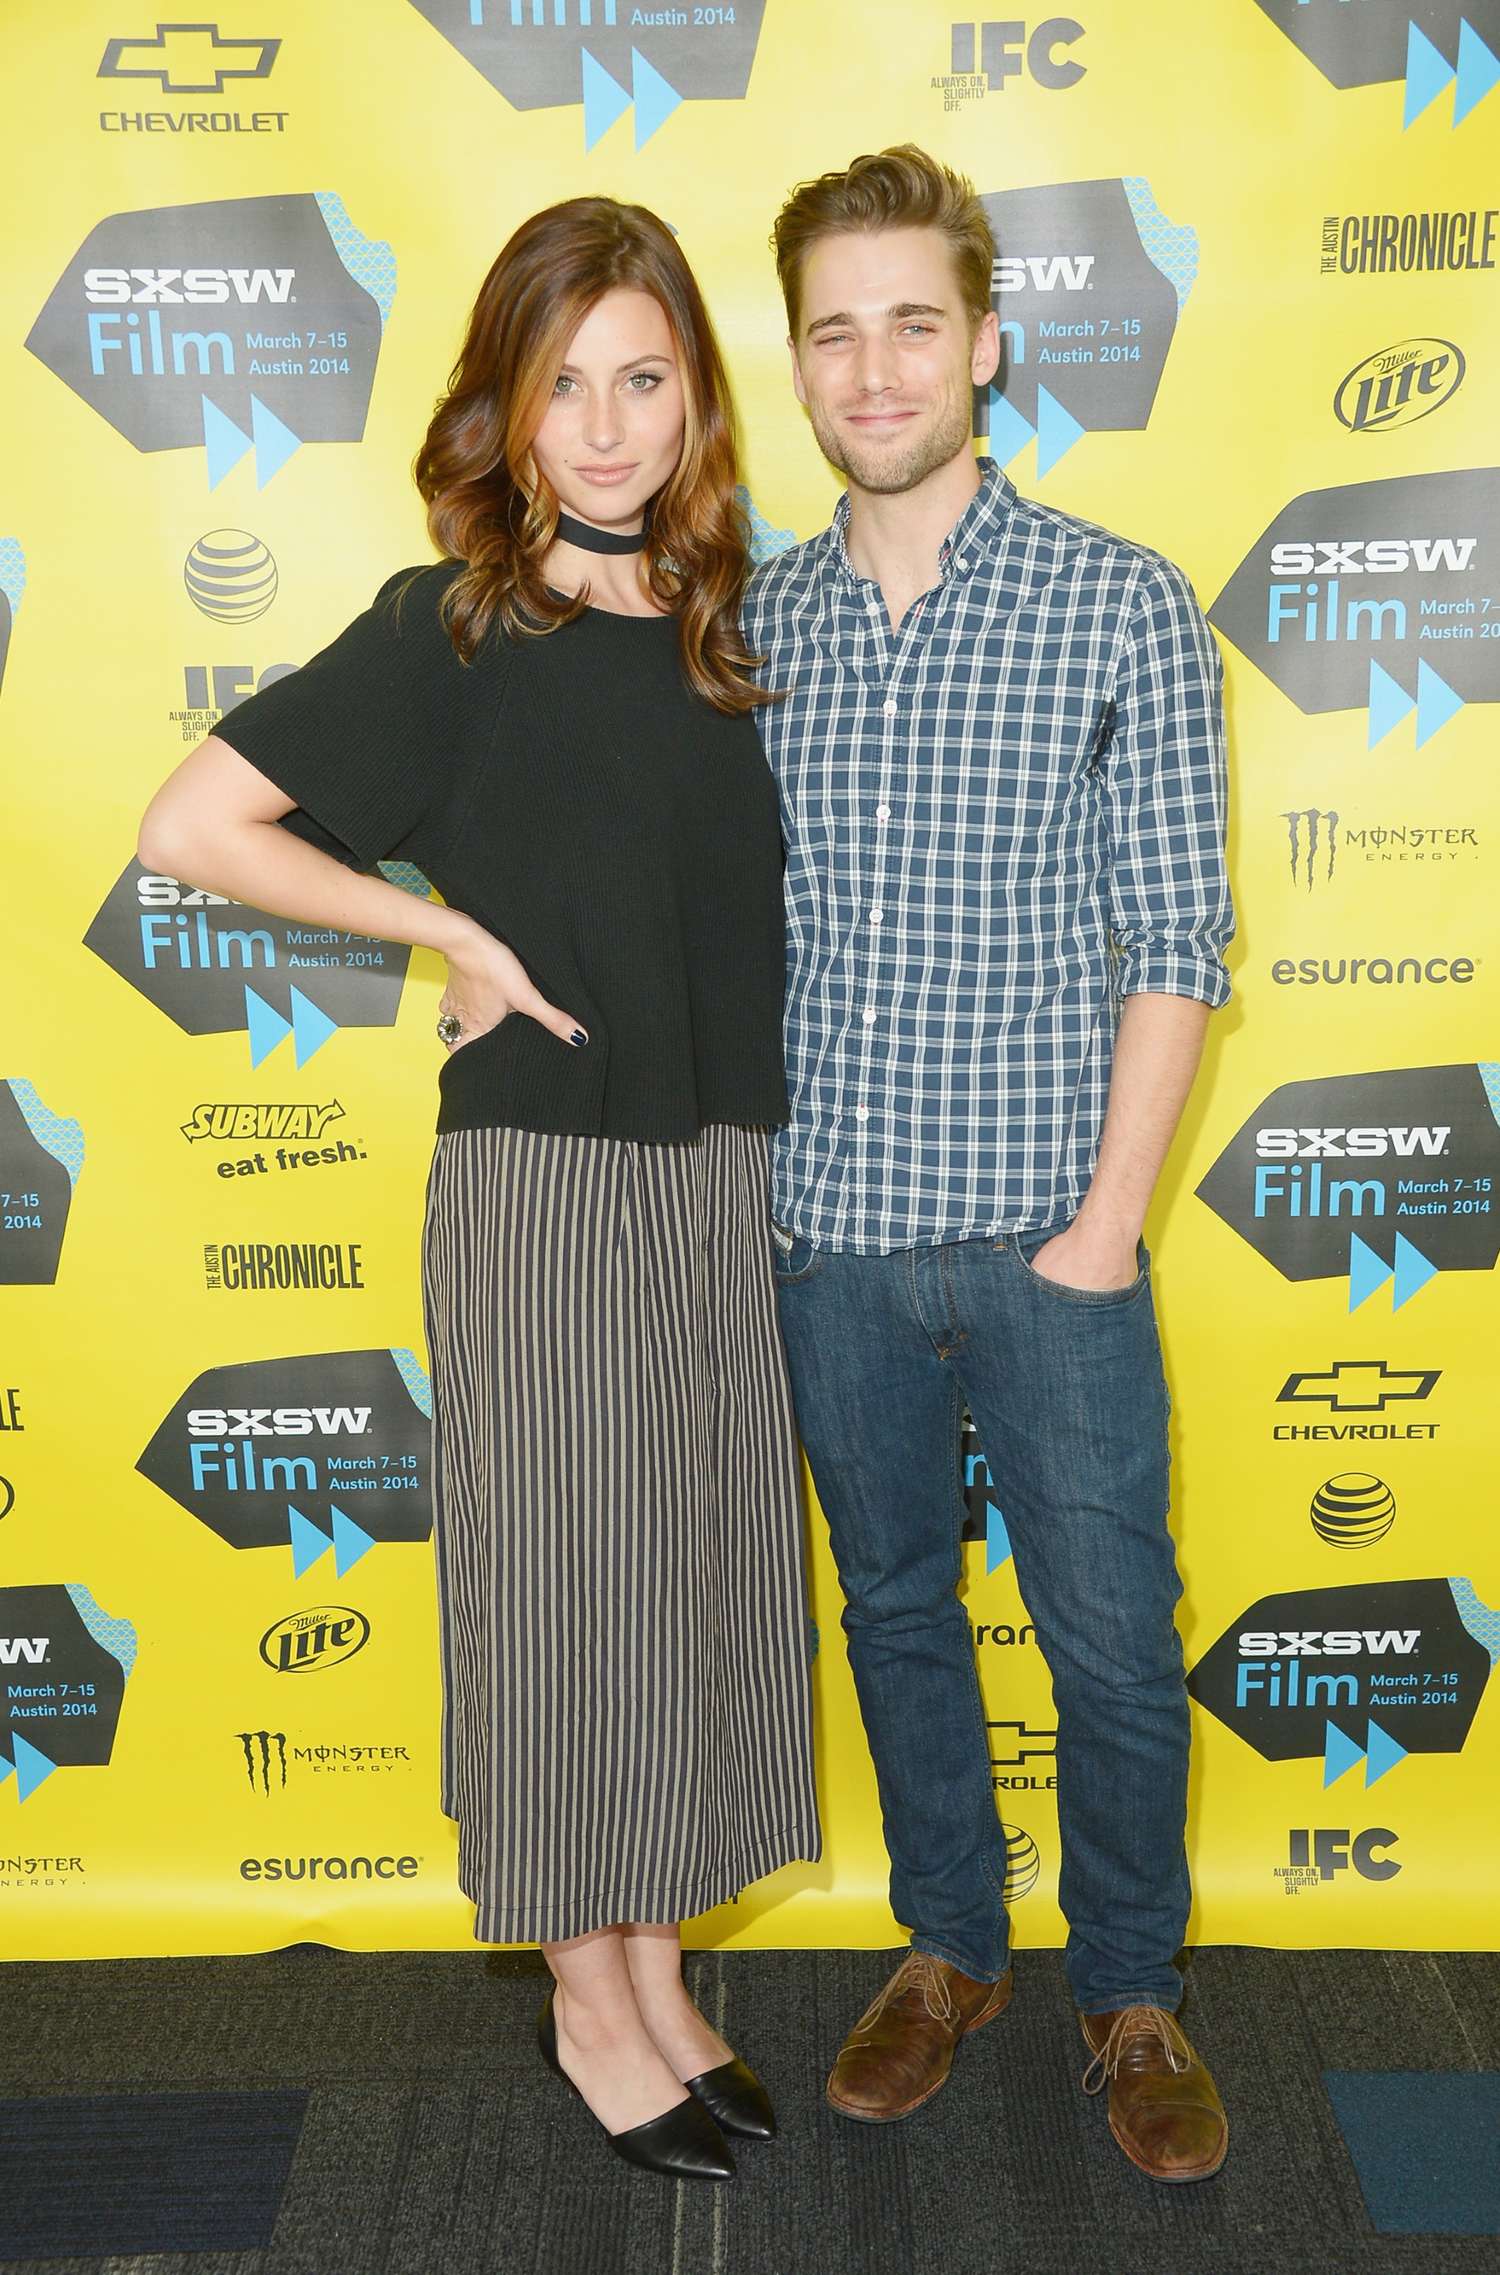 Alyson Aly Michalka Sequoia Official Photo Op And QA at SXSW in Austin-1